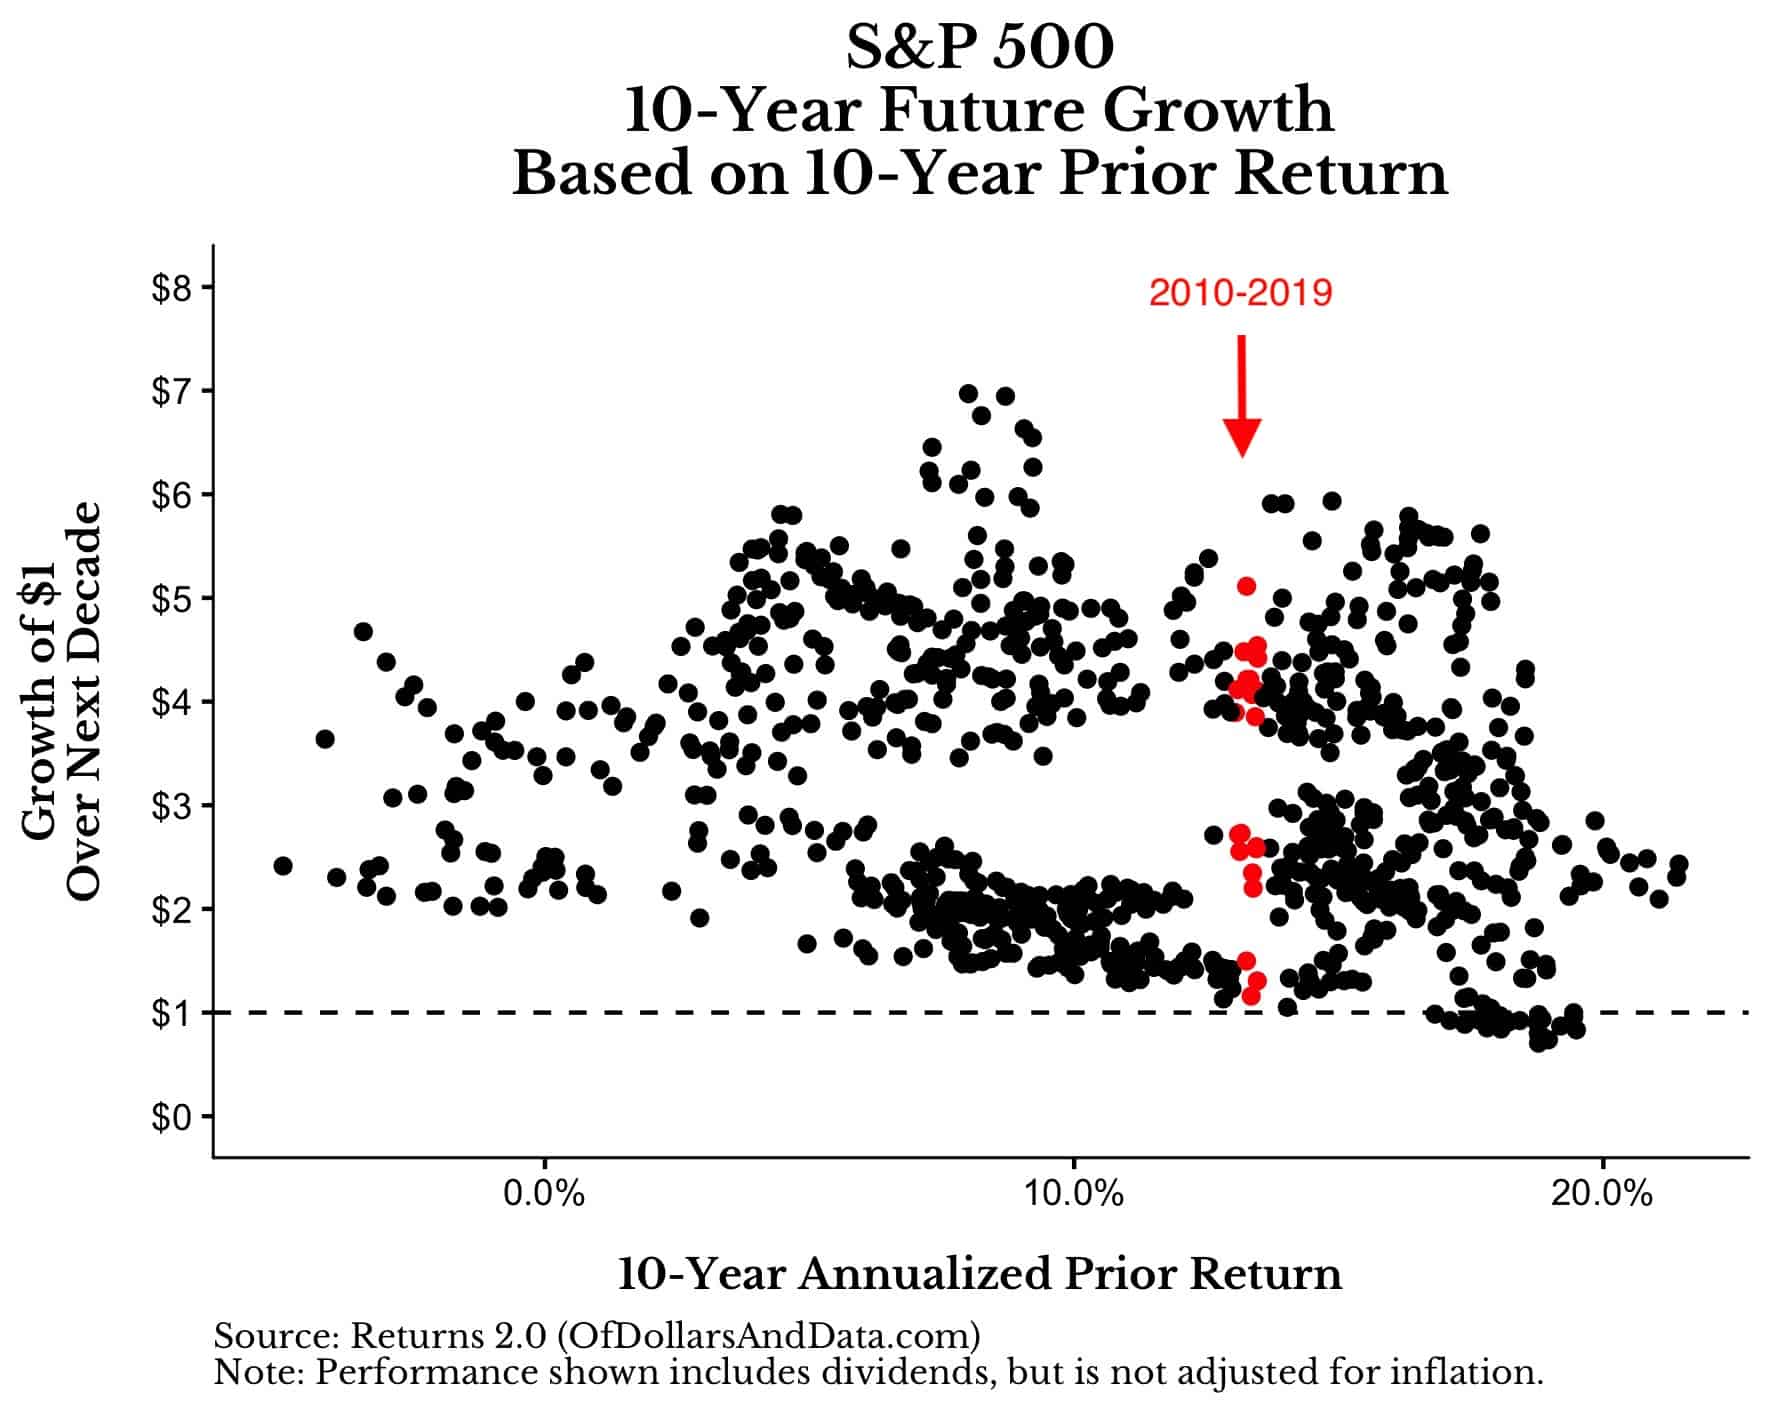 S&P 500 10-year future growth vs 10-year prior growth and where we are today